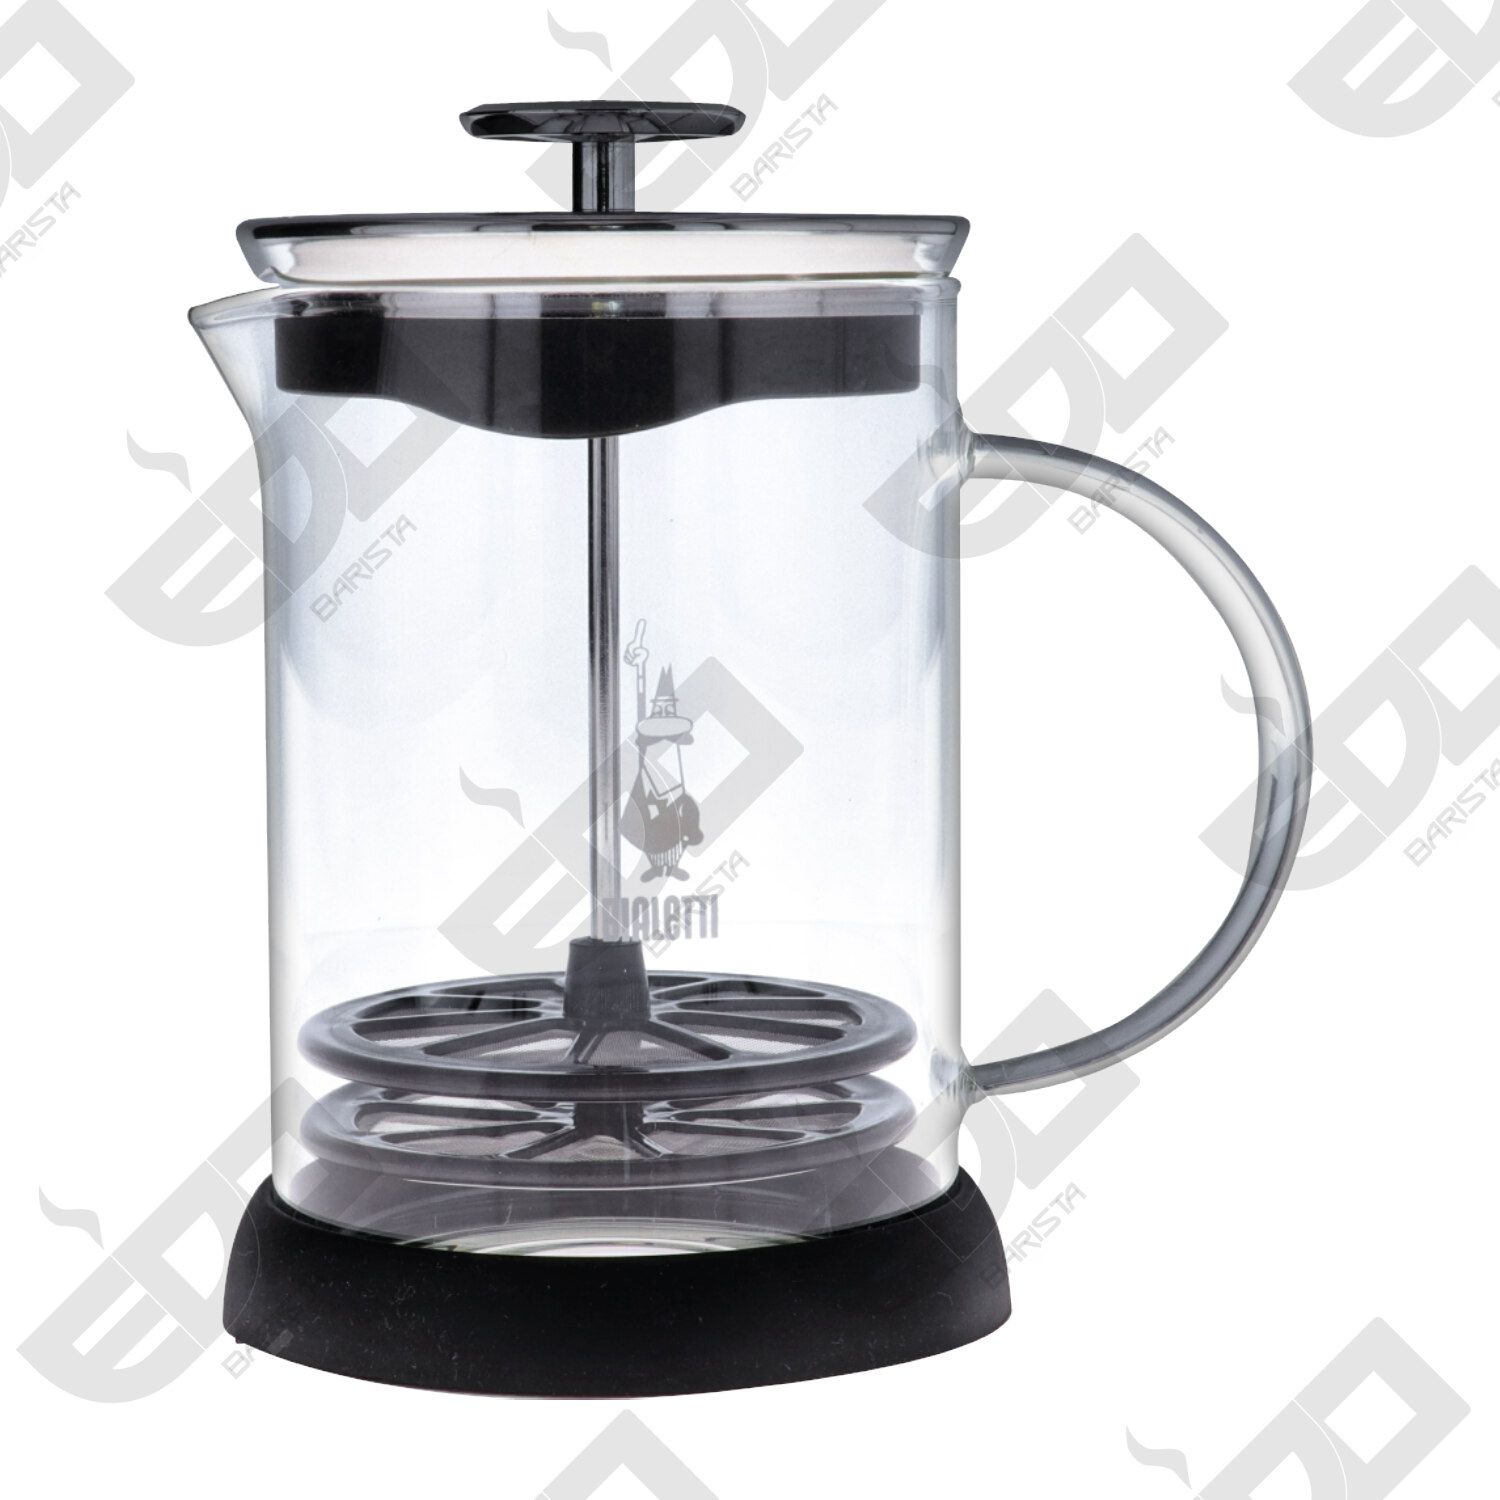 Bialetti Milk Frother 